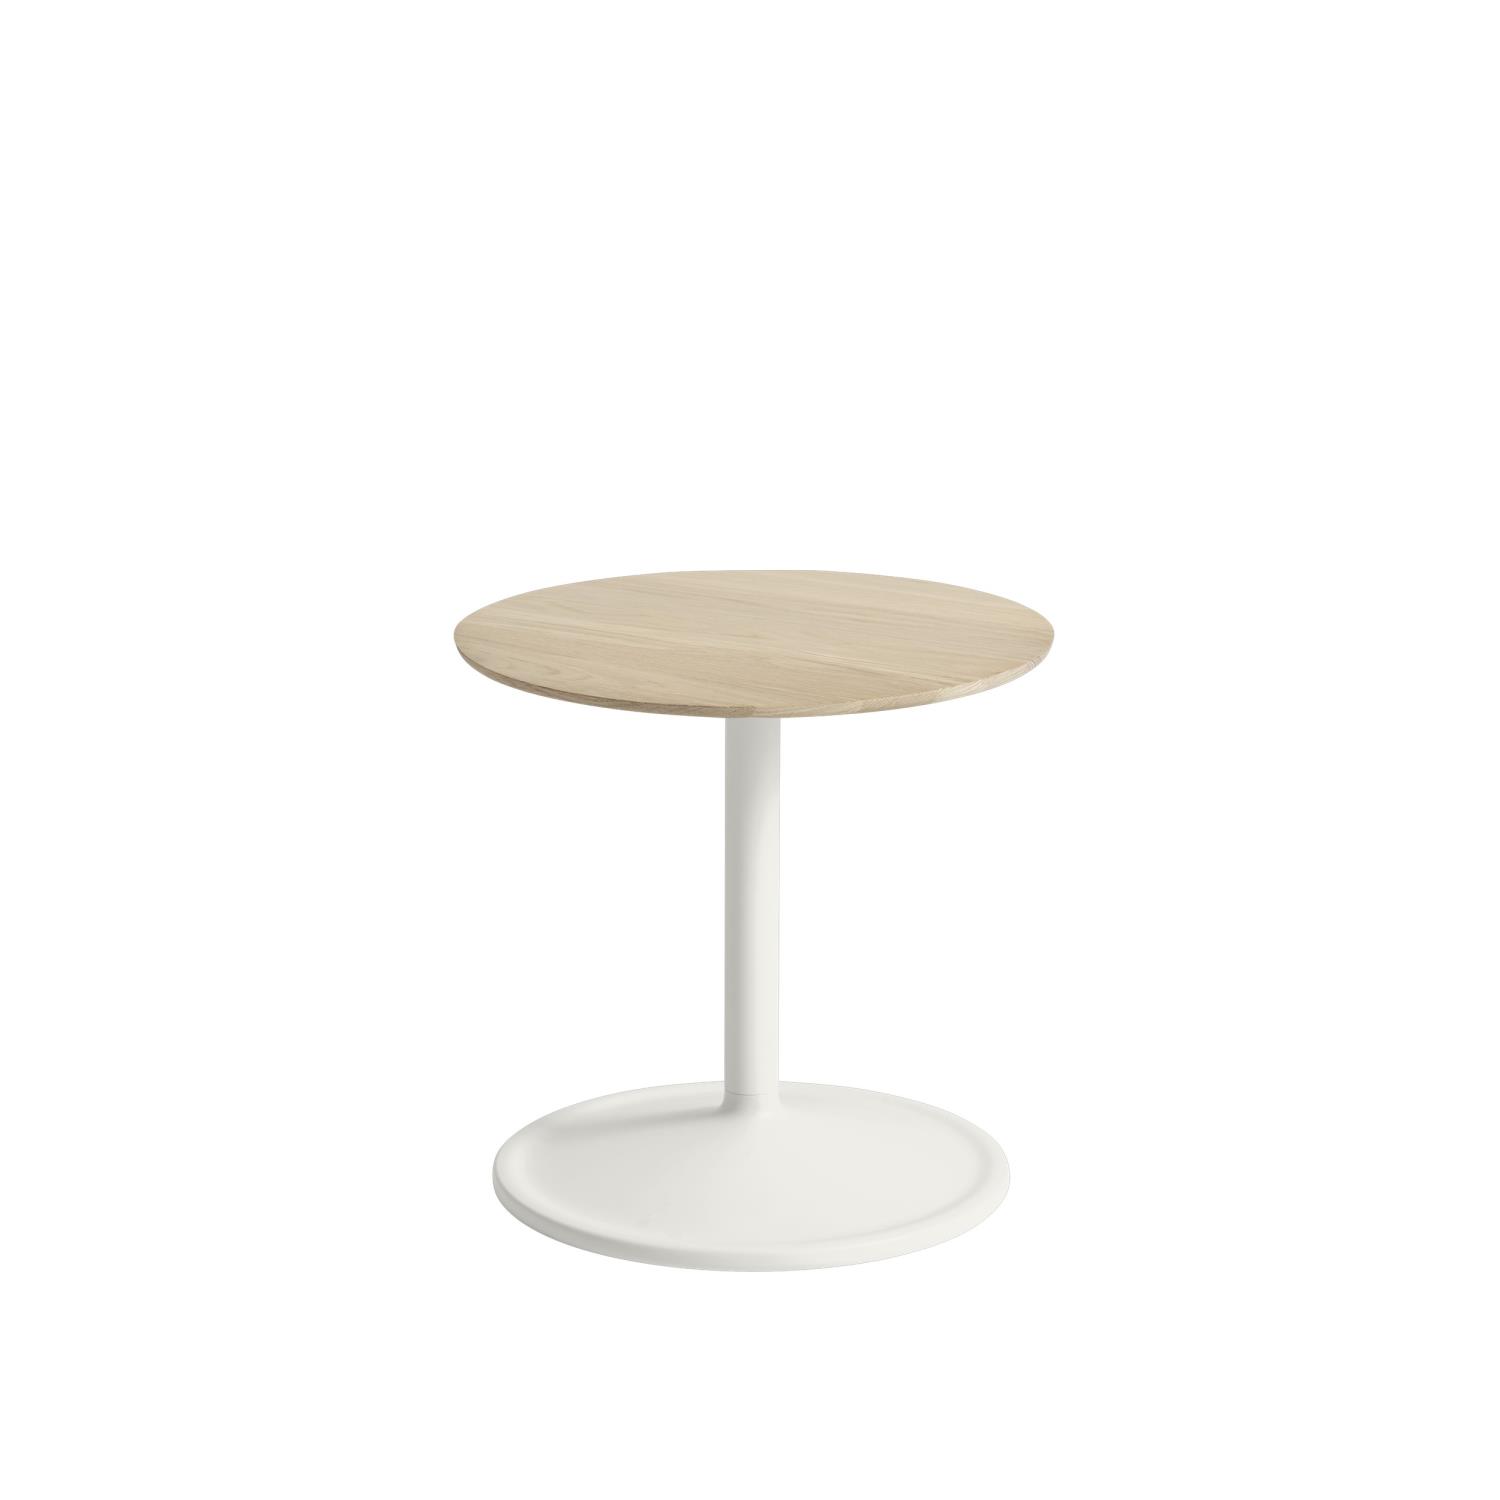 Muuto - Soft Side Table - Off White Solid Oak - H40 x Ø41